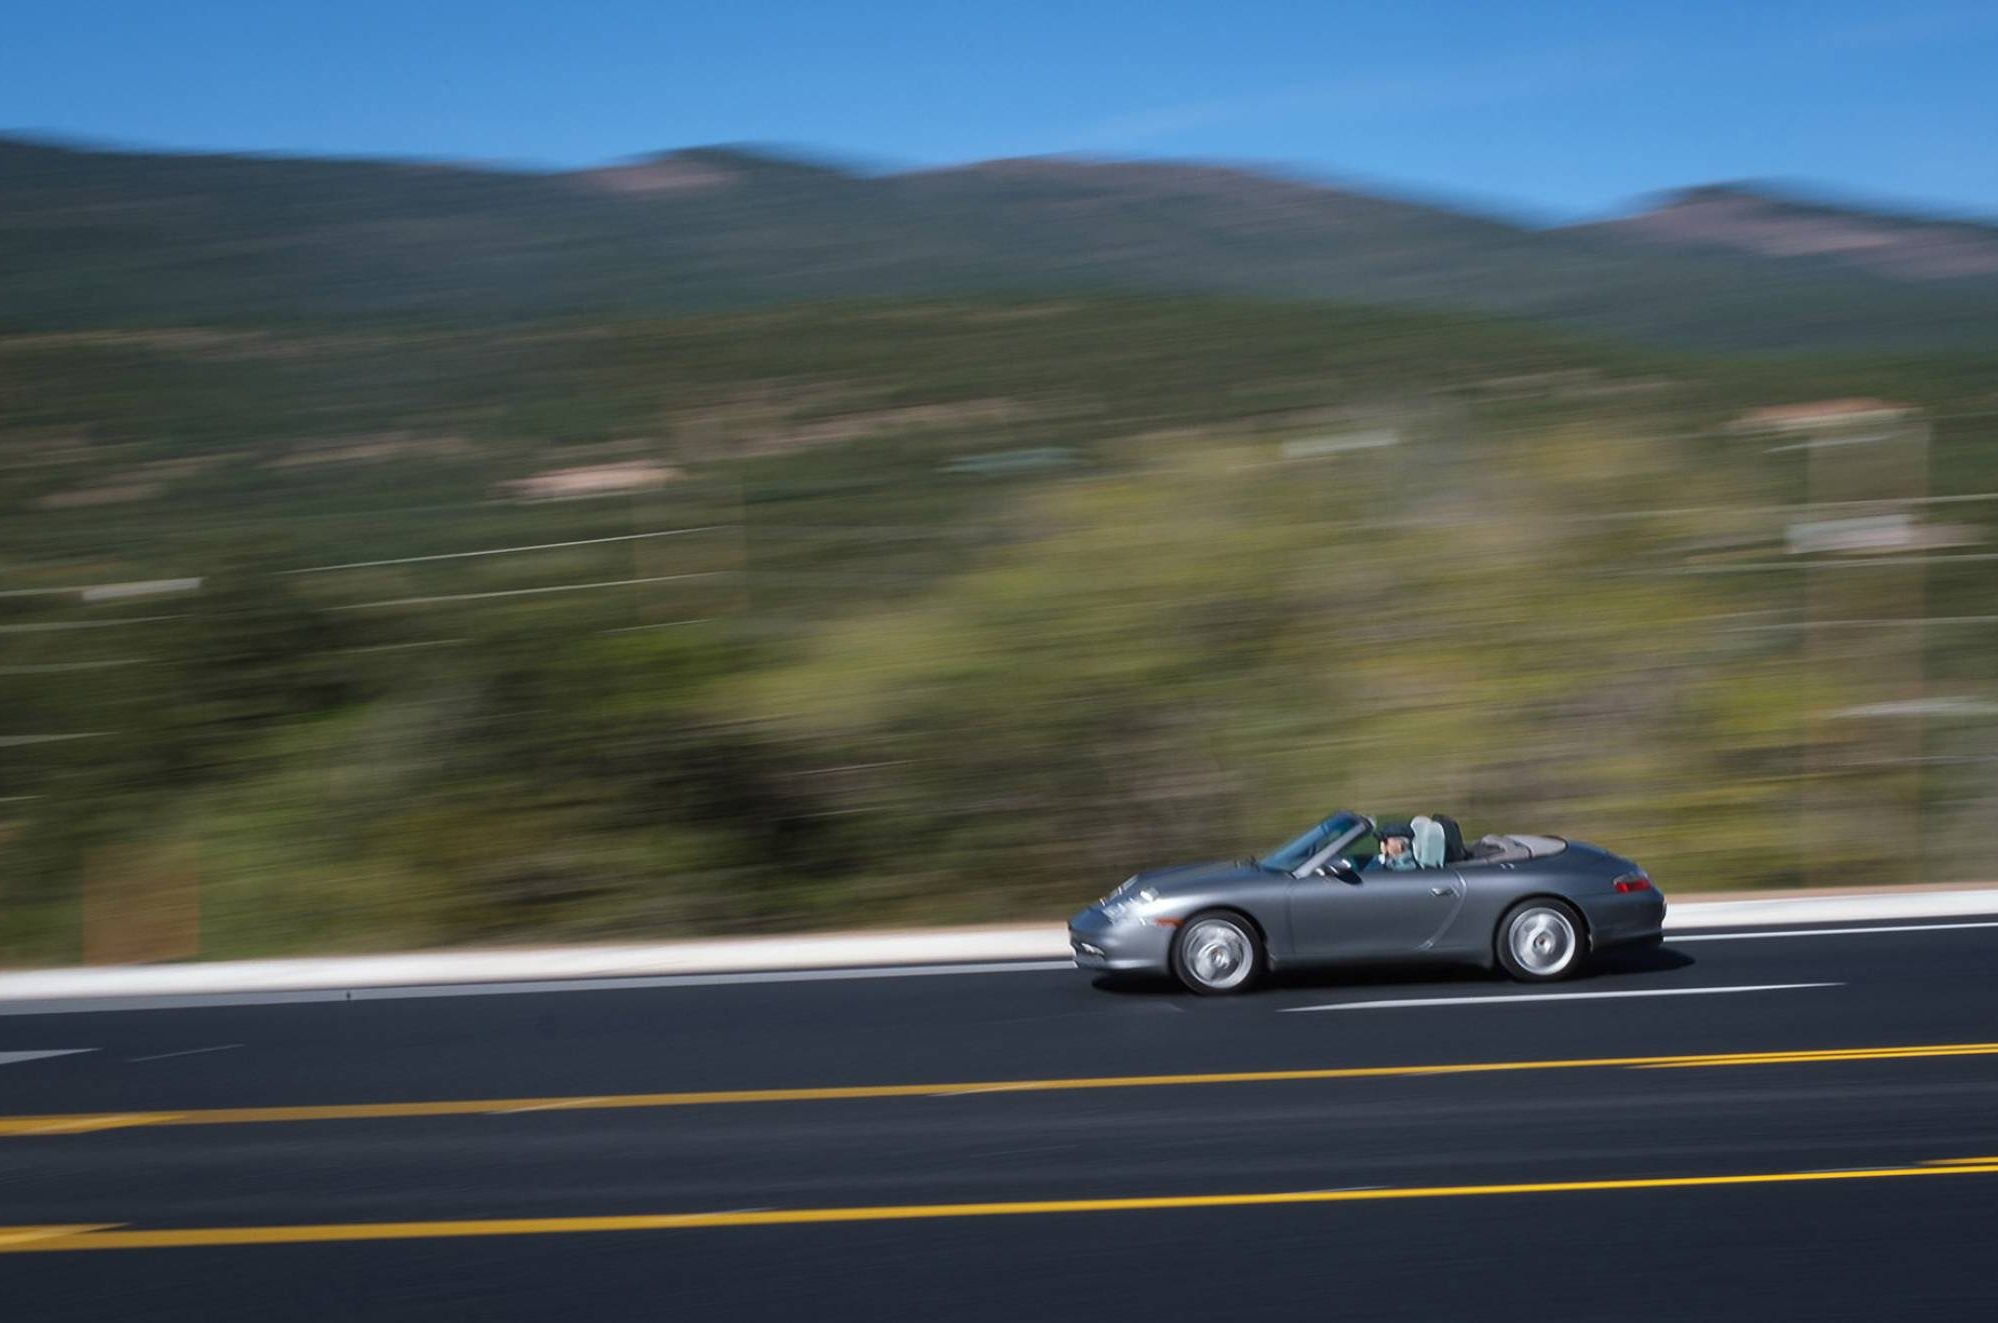 Person in a silver sportscar driving quickly down the highway. The background and foreground are blurred to emphasize the speed of the car